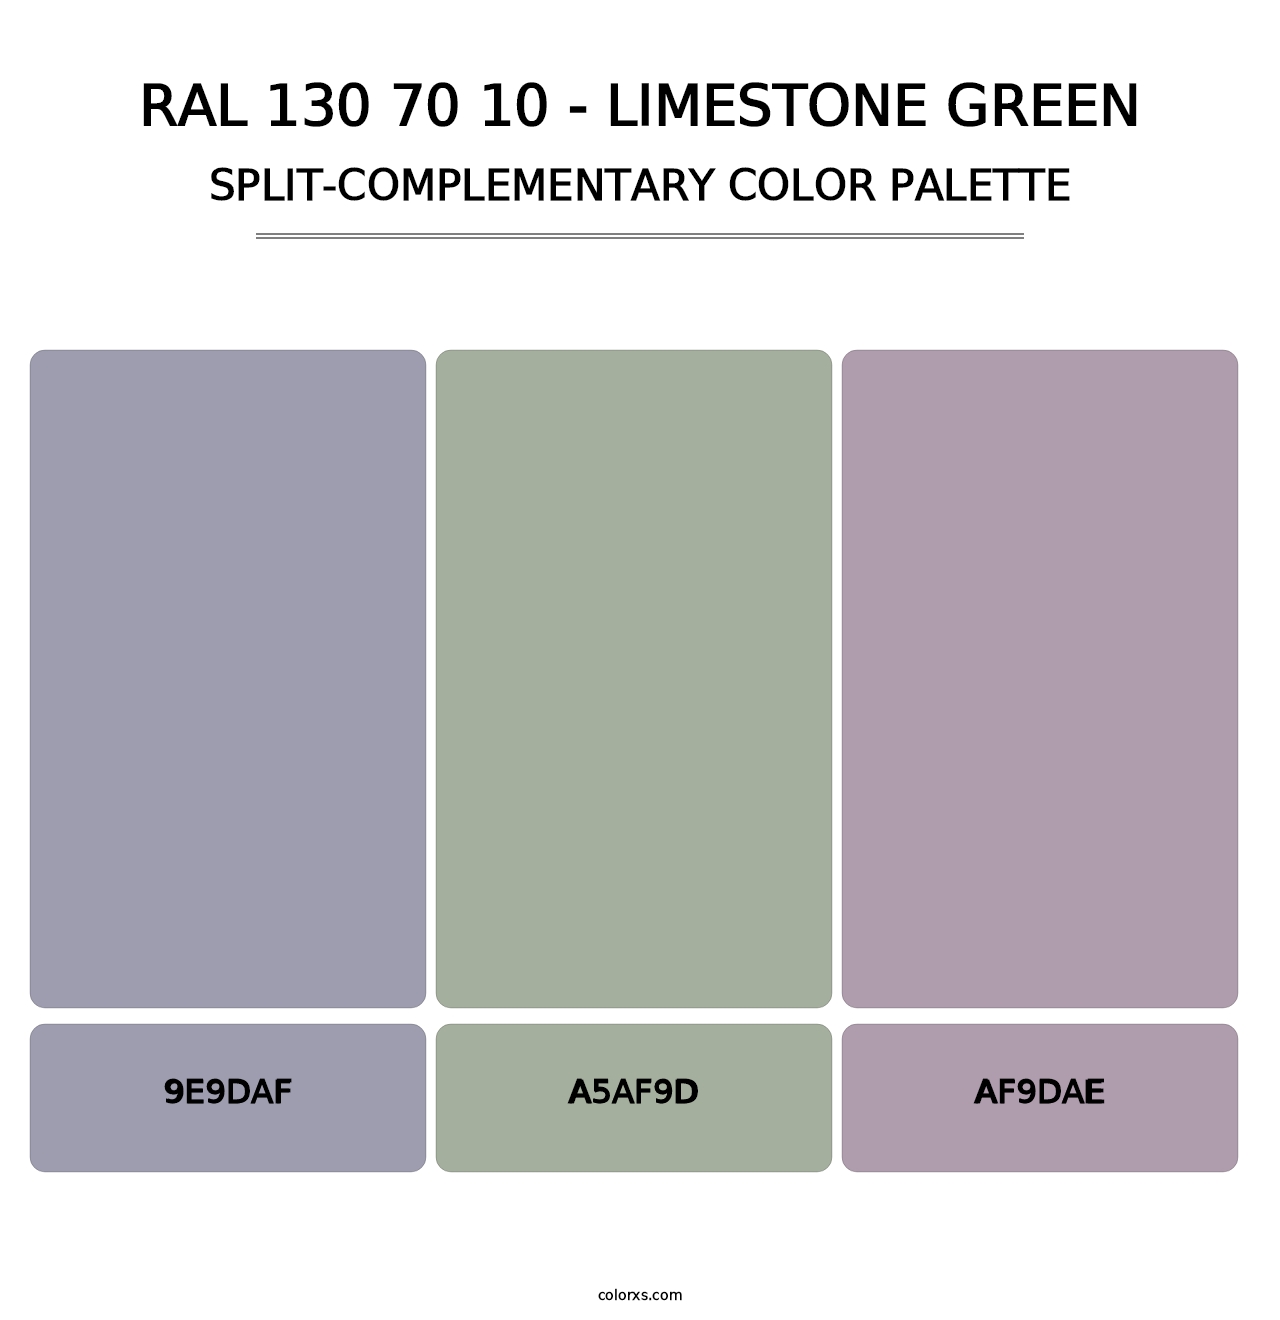 RAL 130 70 10 - Limestone Green - Split-Complementary Color Palette